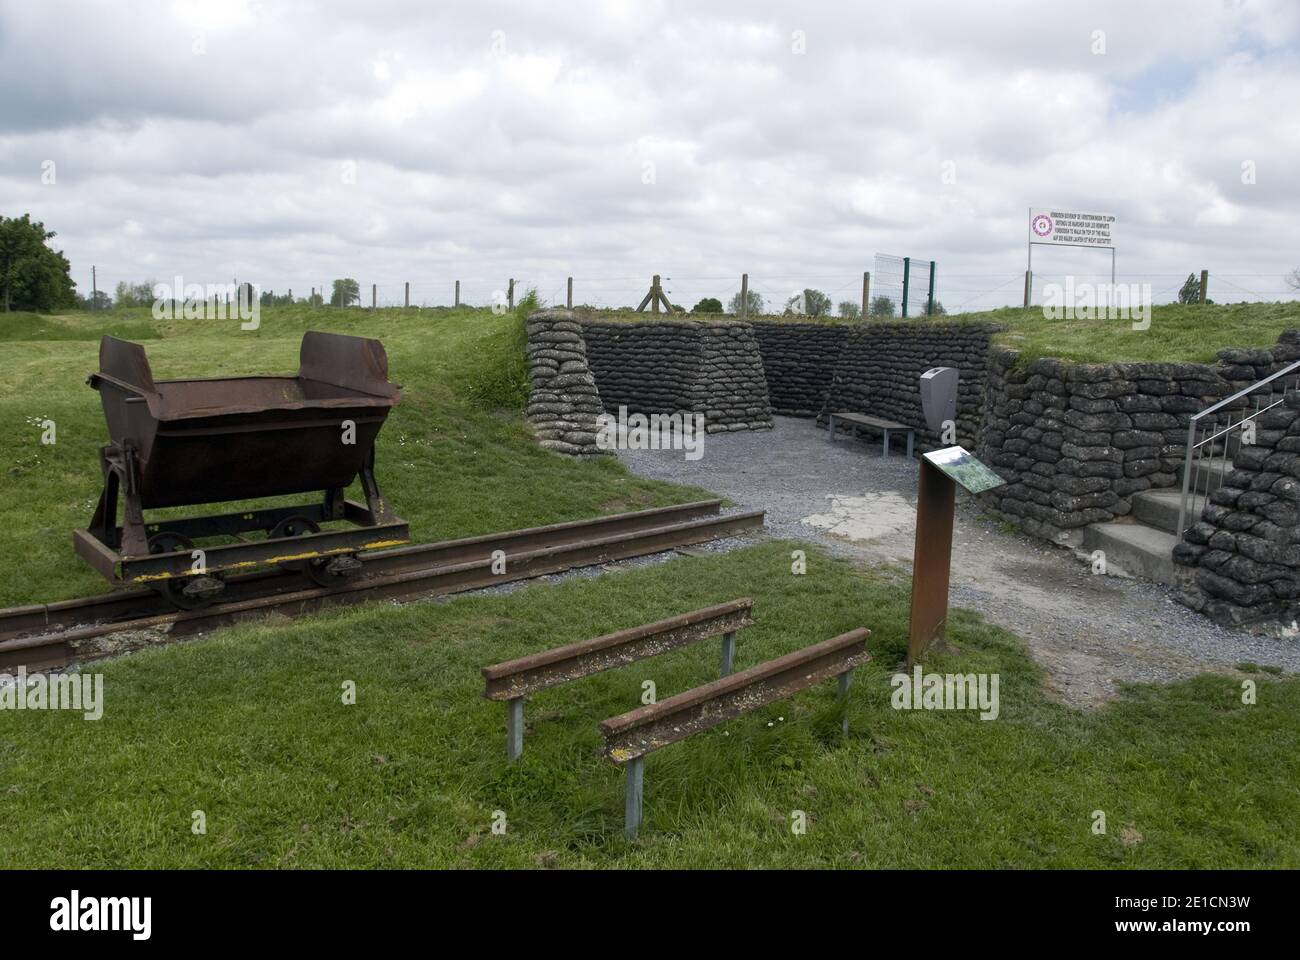 Battlefield railway artifacts at the “Trench of Death,” a preserved section of WW1 military trenches at Diksmuide, Belgium. Stock Photo